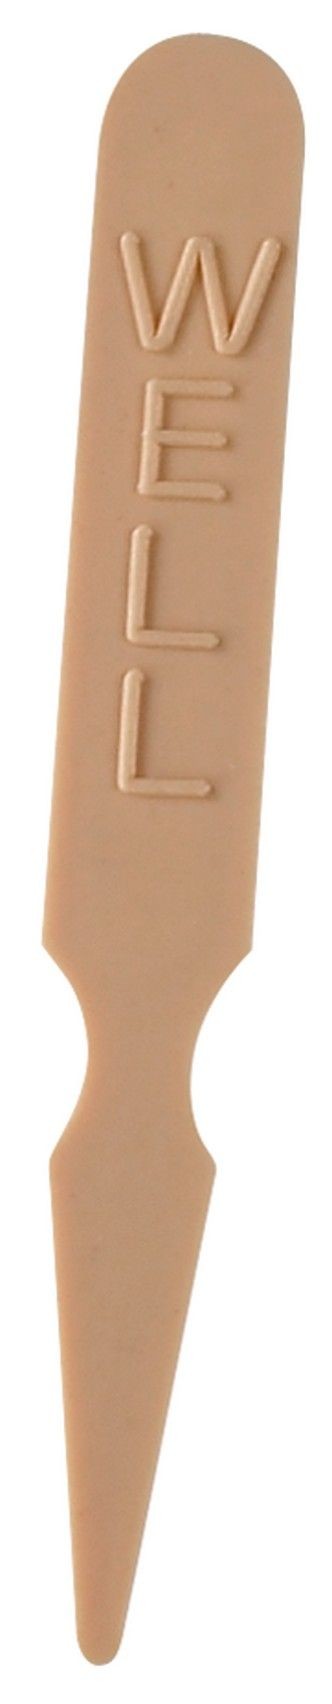 Winco PSM-W Steak Markers, Well, Tan, 1000/Bag